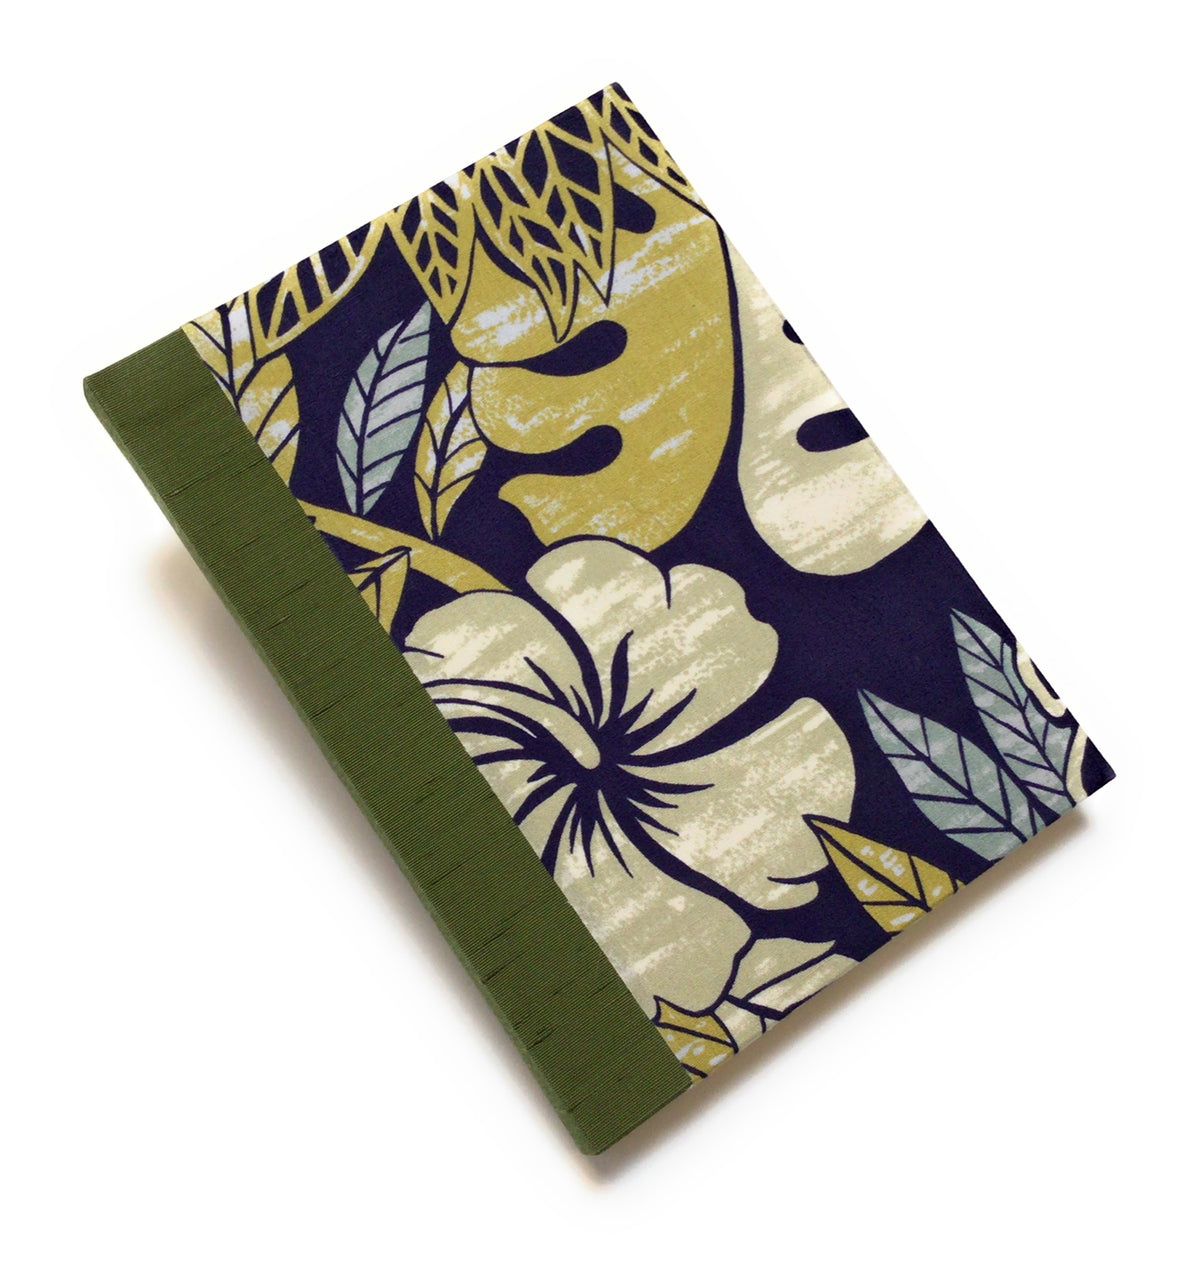 Tropical flowers and leaves in yellow green, blue gray, green gray on dark blue background covers. Moss green Japanese bookcloth spine. 200 pages, both sides. 5 x 7.